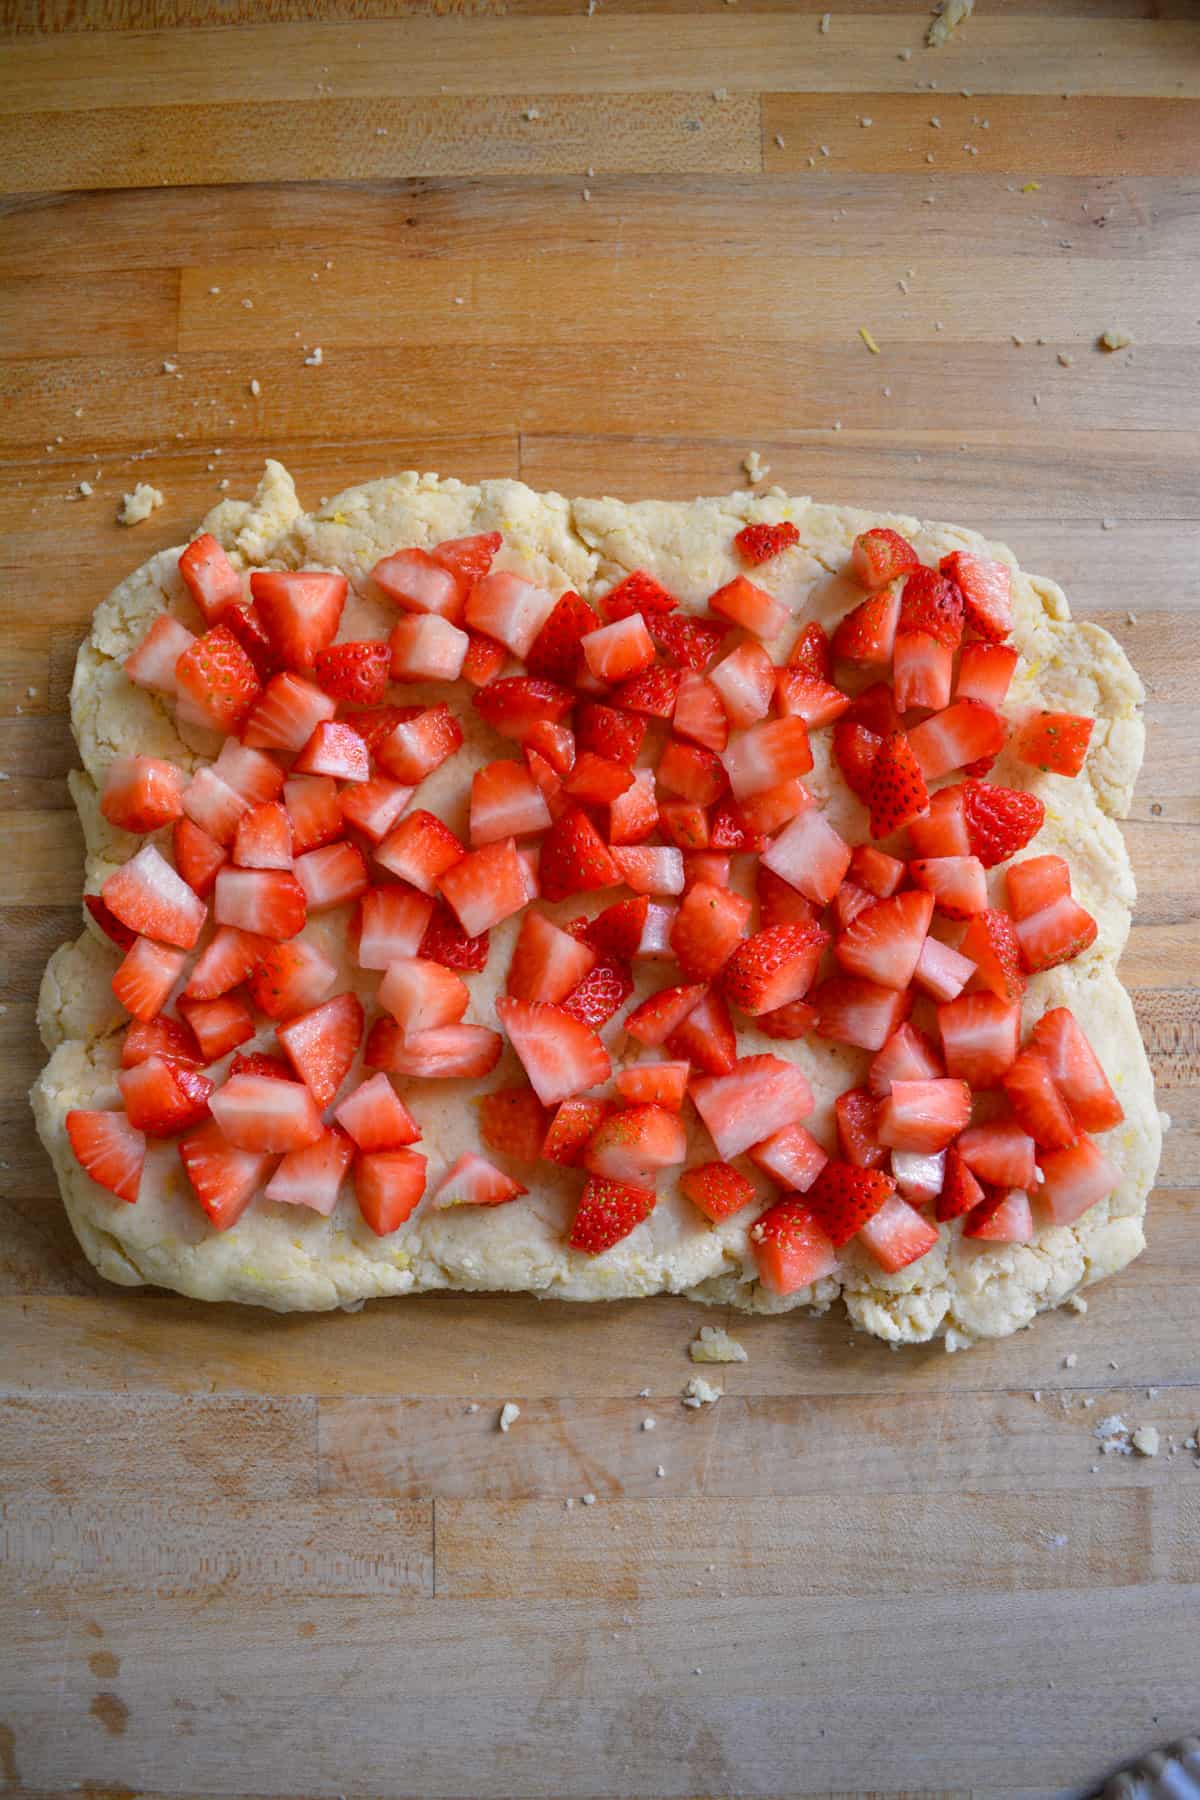 Scone dough patted nto a rectangle with chopped strawberries on top of it.